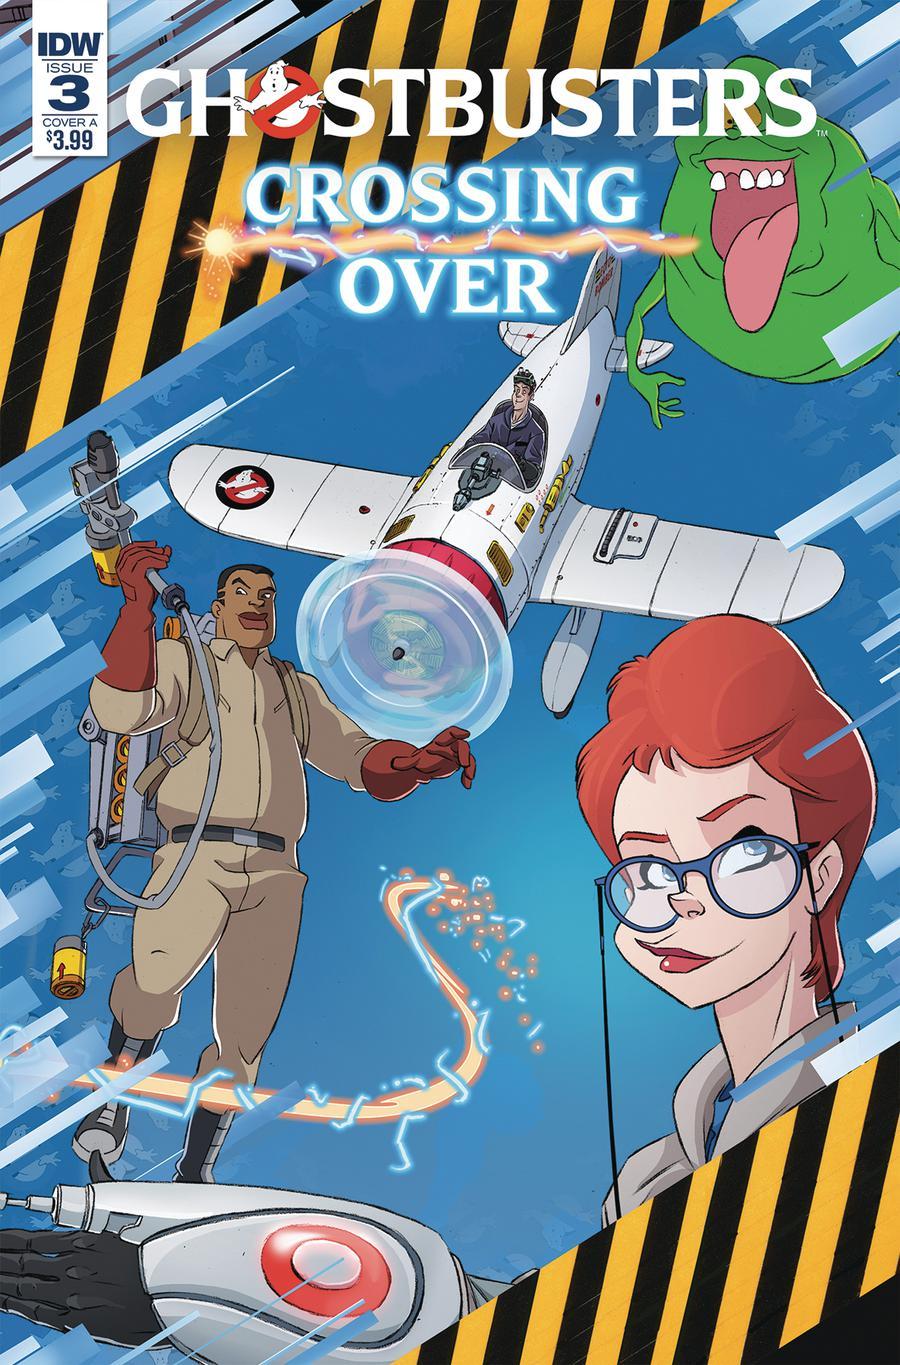 Ghostbusters Crossing Over Vol. 1 #3